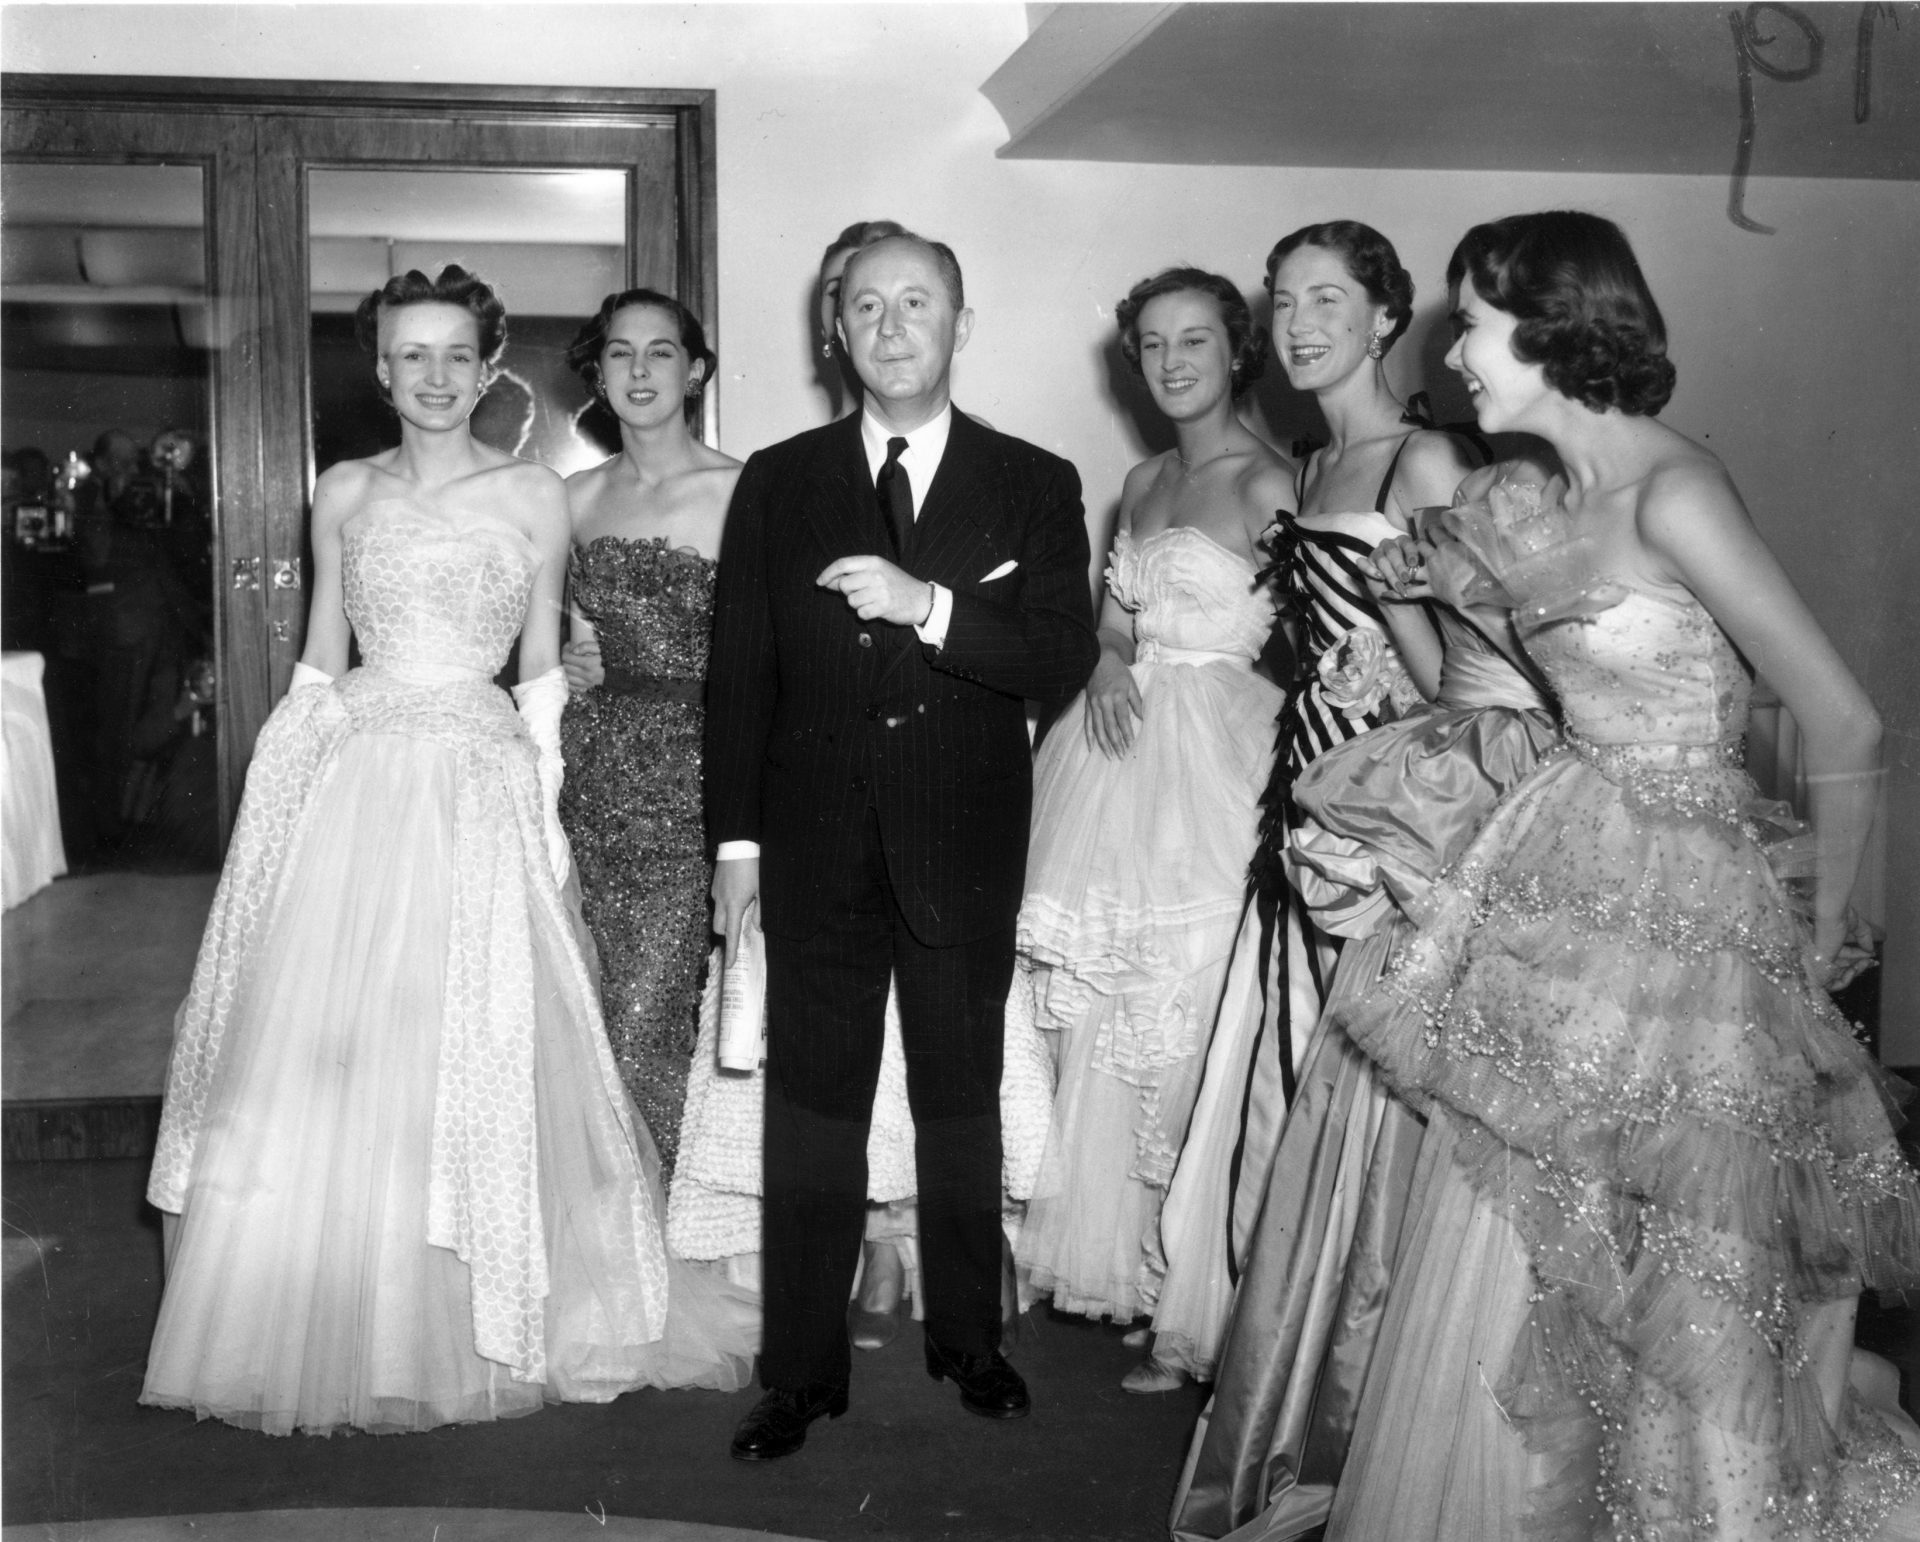 Mame Fashion Dictionary: Christian Dior And Models 1950